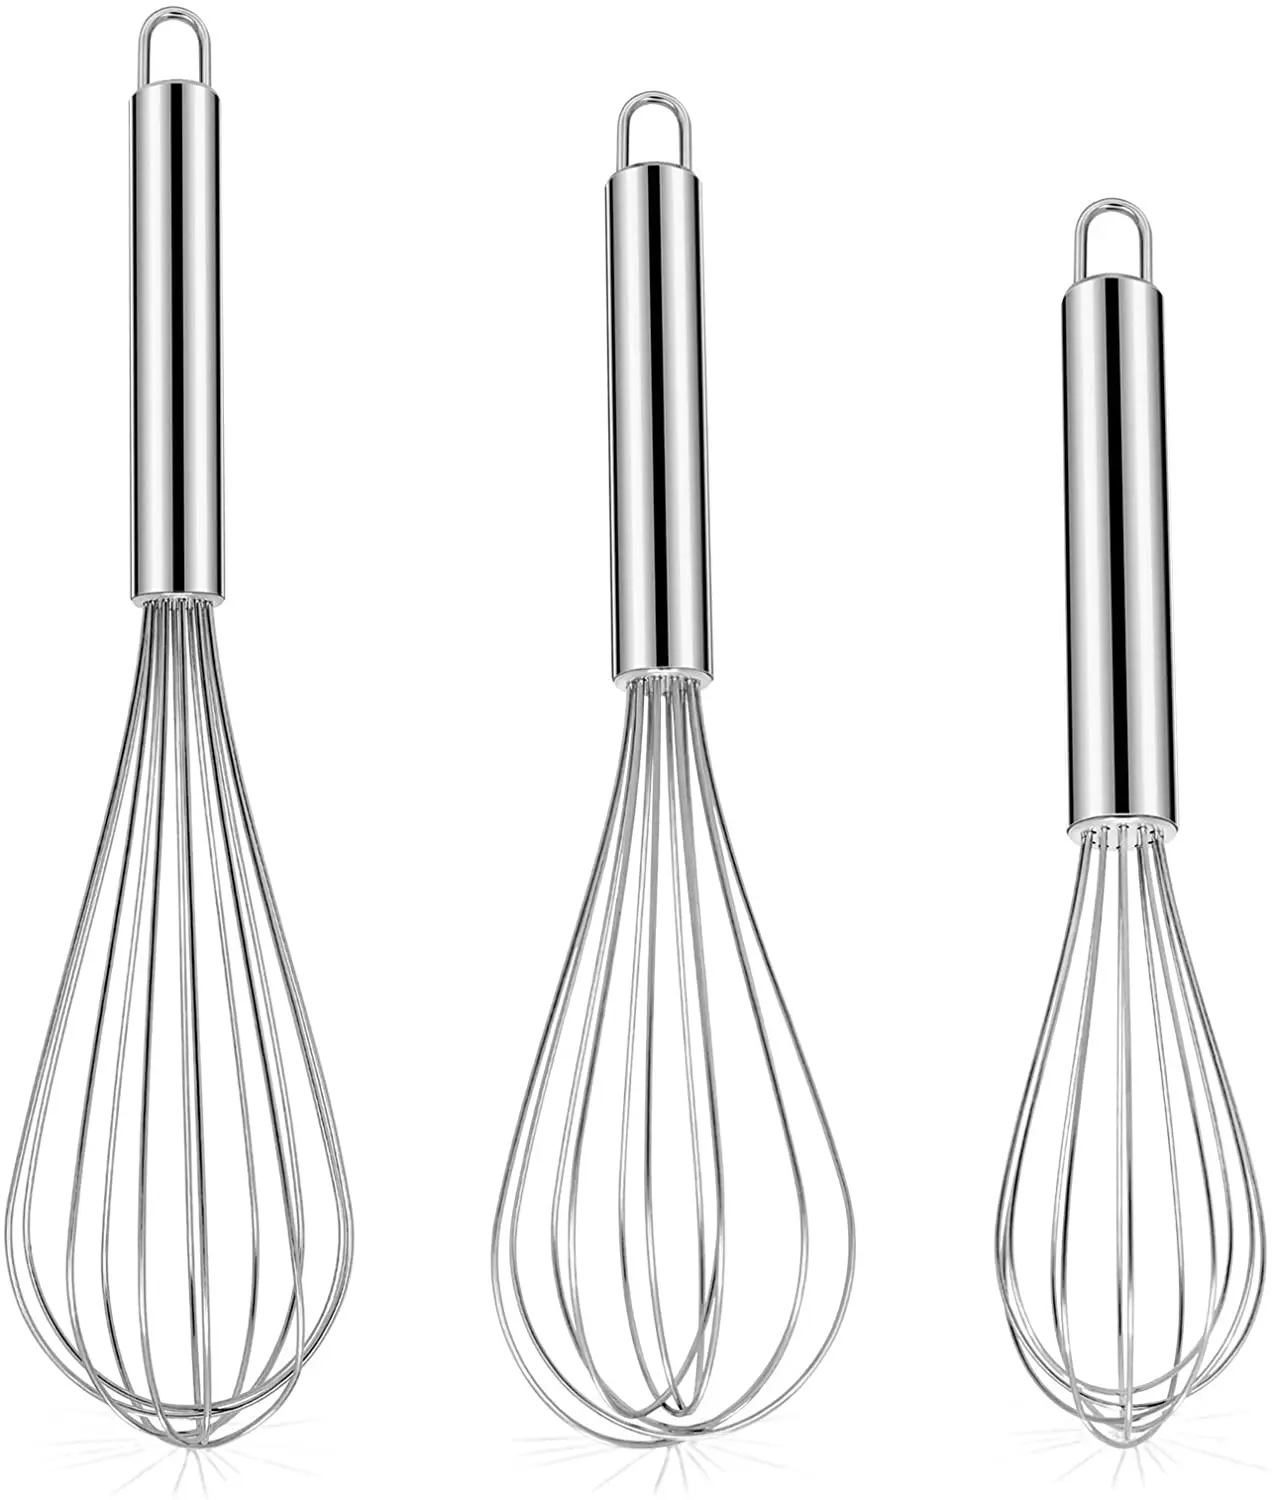 The Whizzy Whisk 